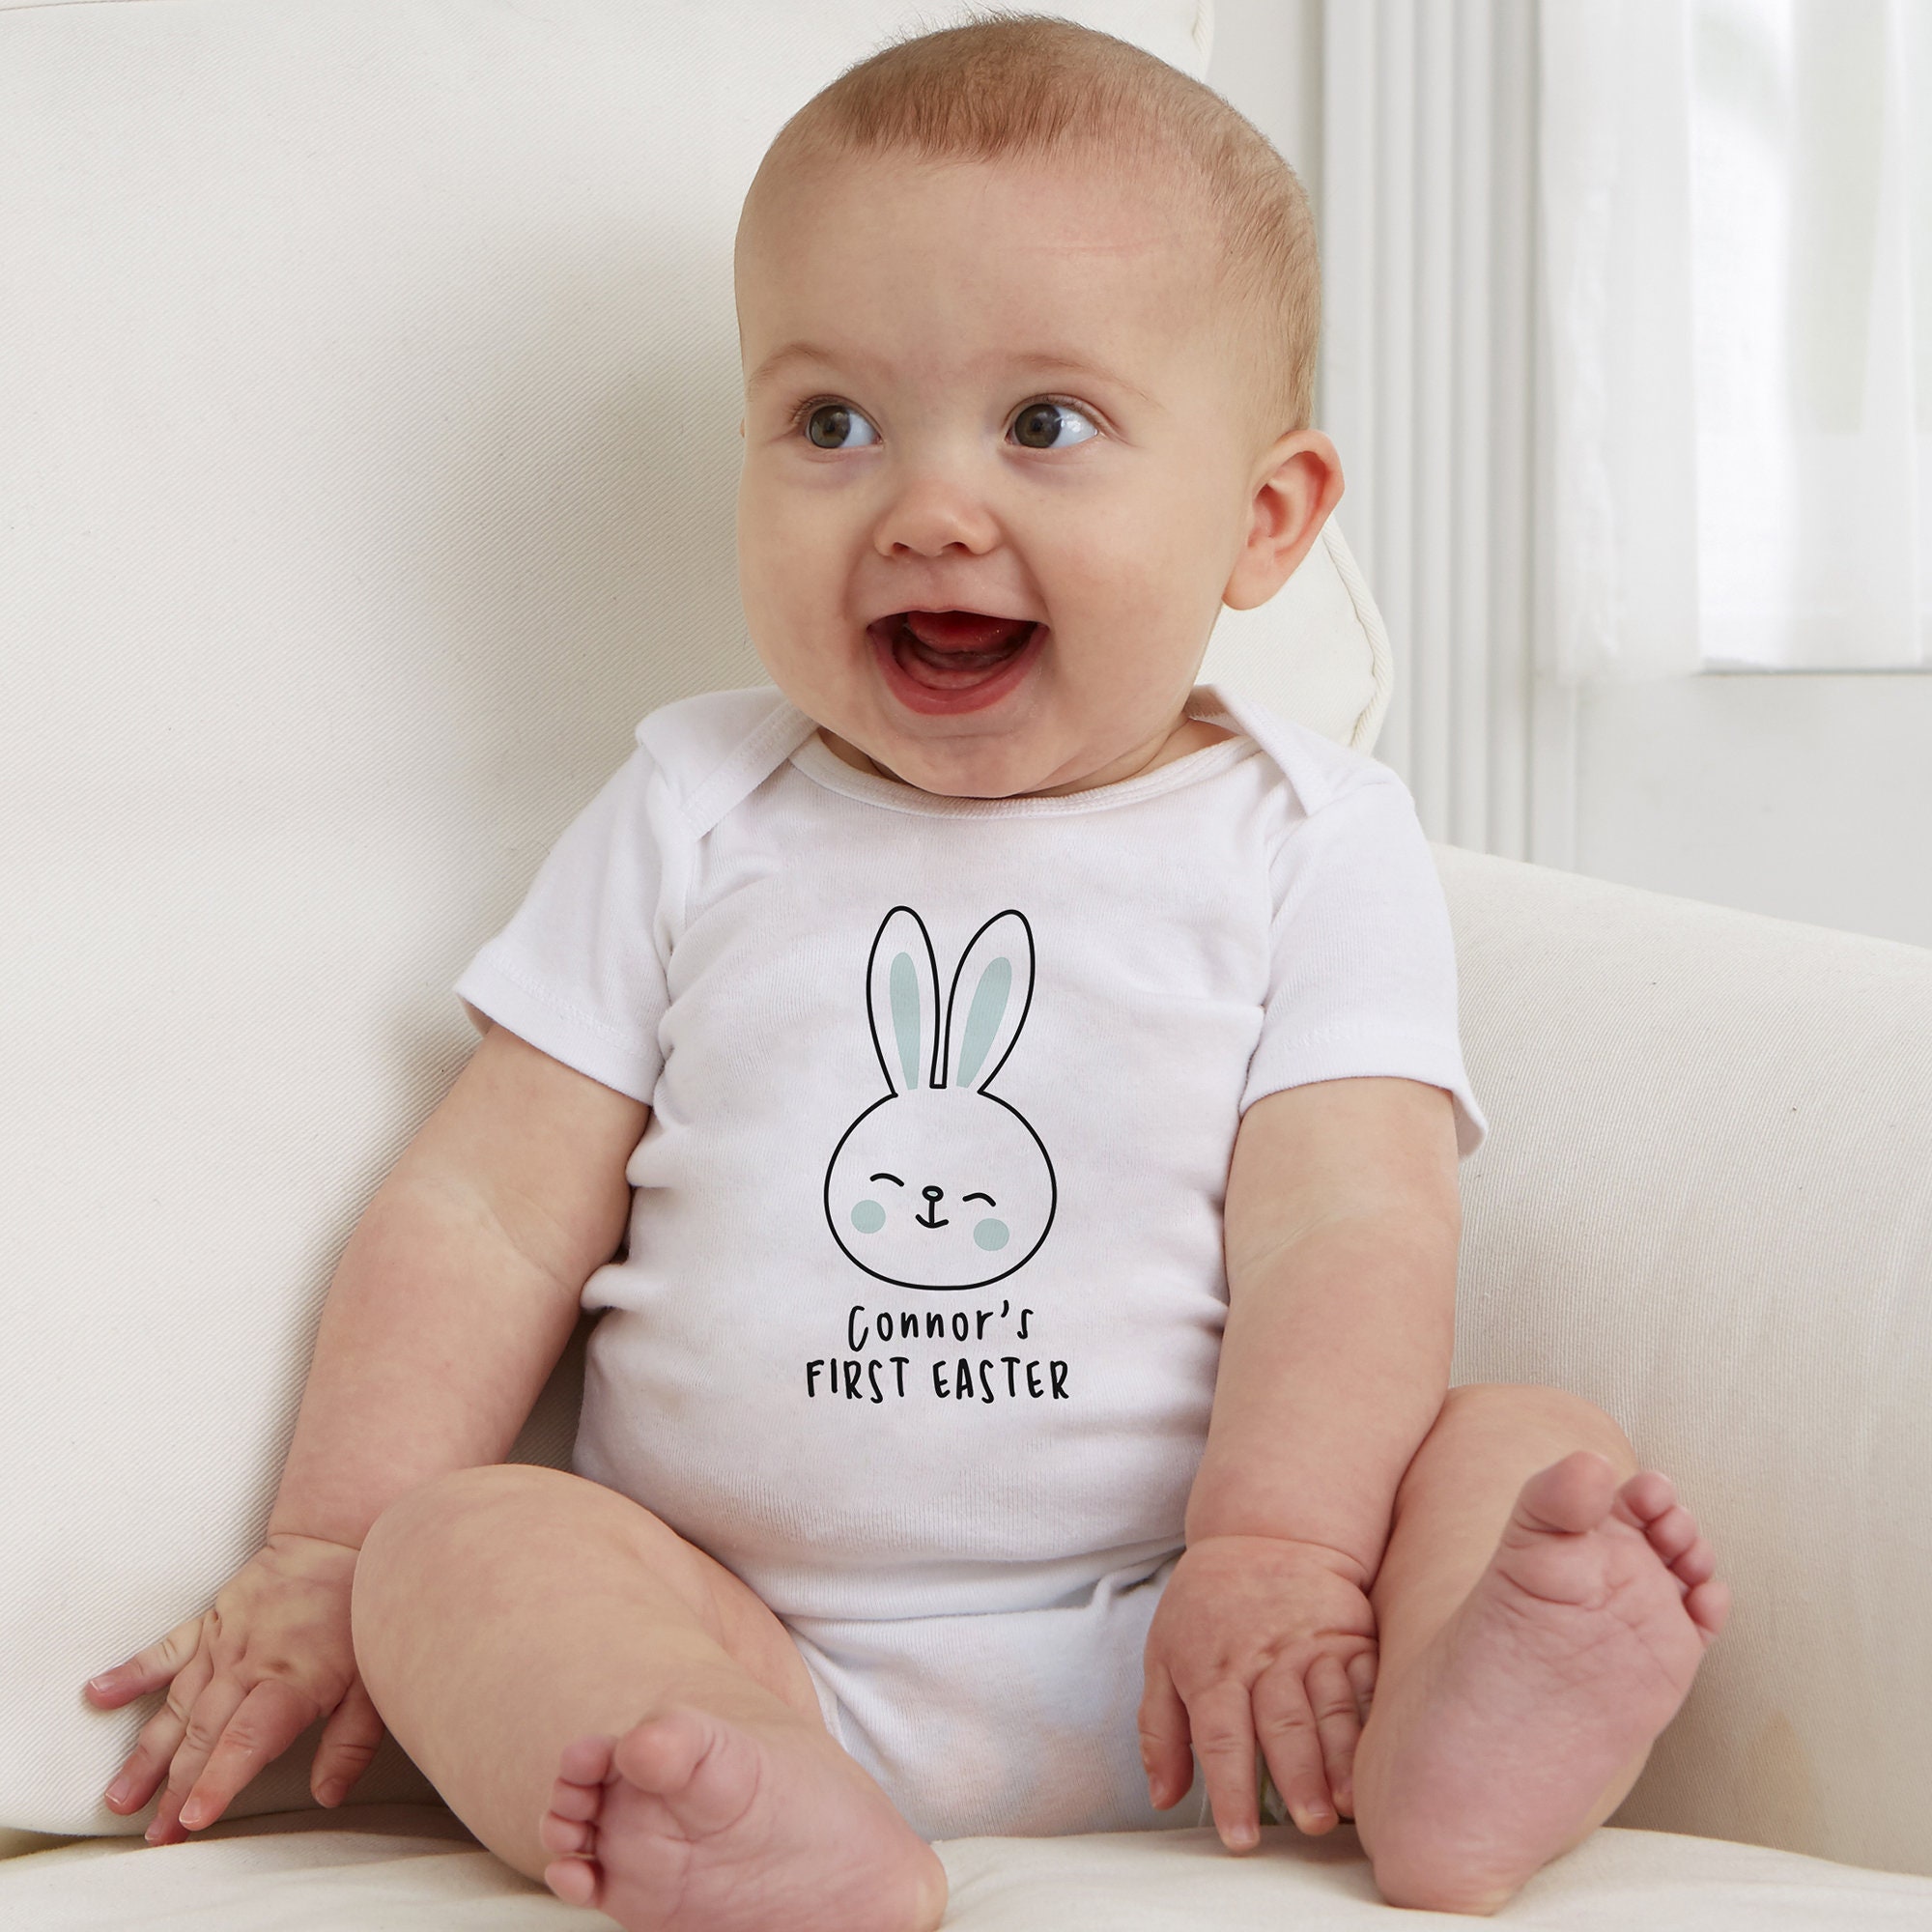 First Easter Bunny Personalized Baby Bodysuit, Baby Outfit, Baby Onesie, First Easter, Easter Gifts for Baby, Baby Gift, Newborn, Ships Fast